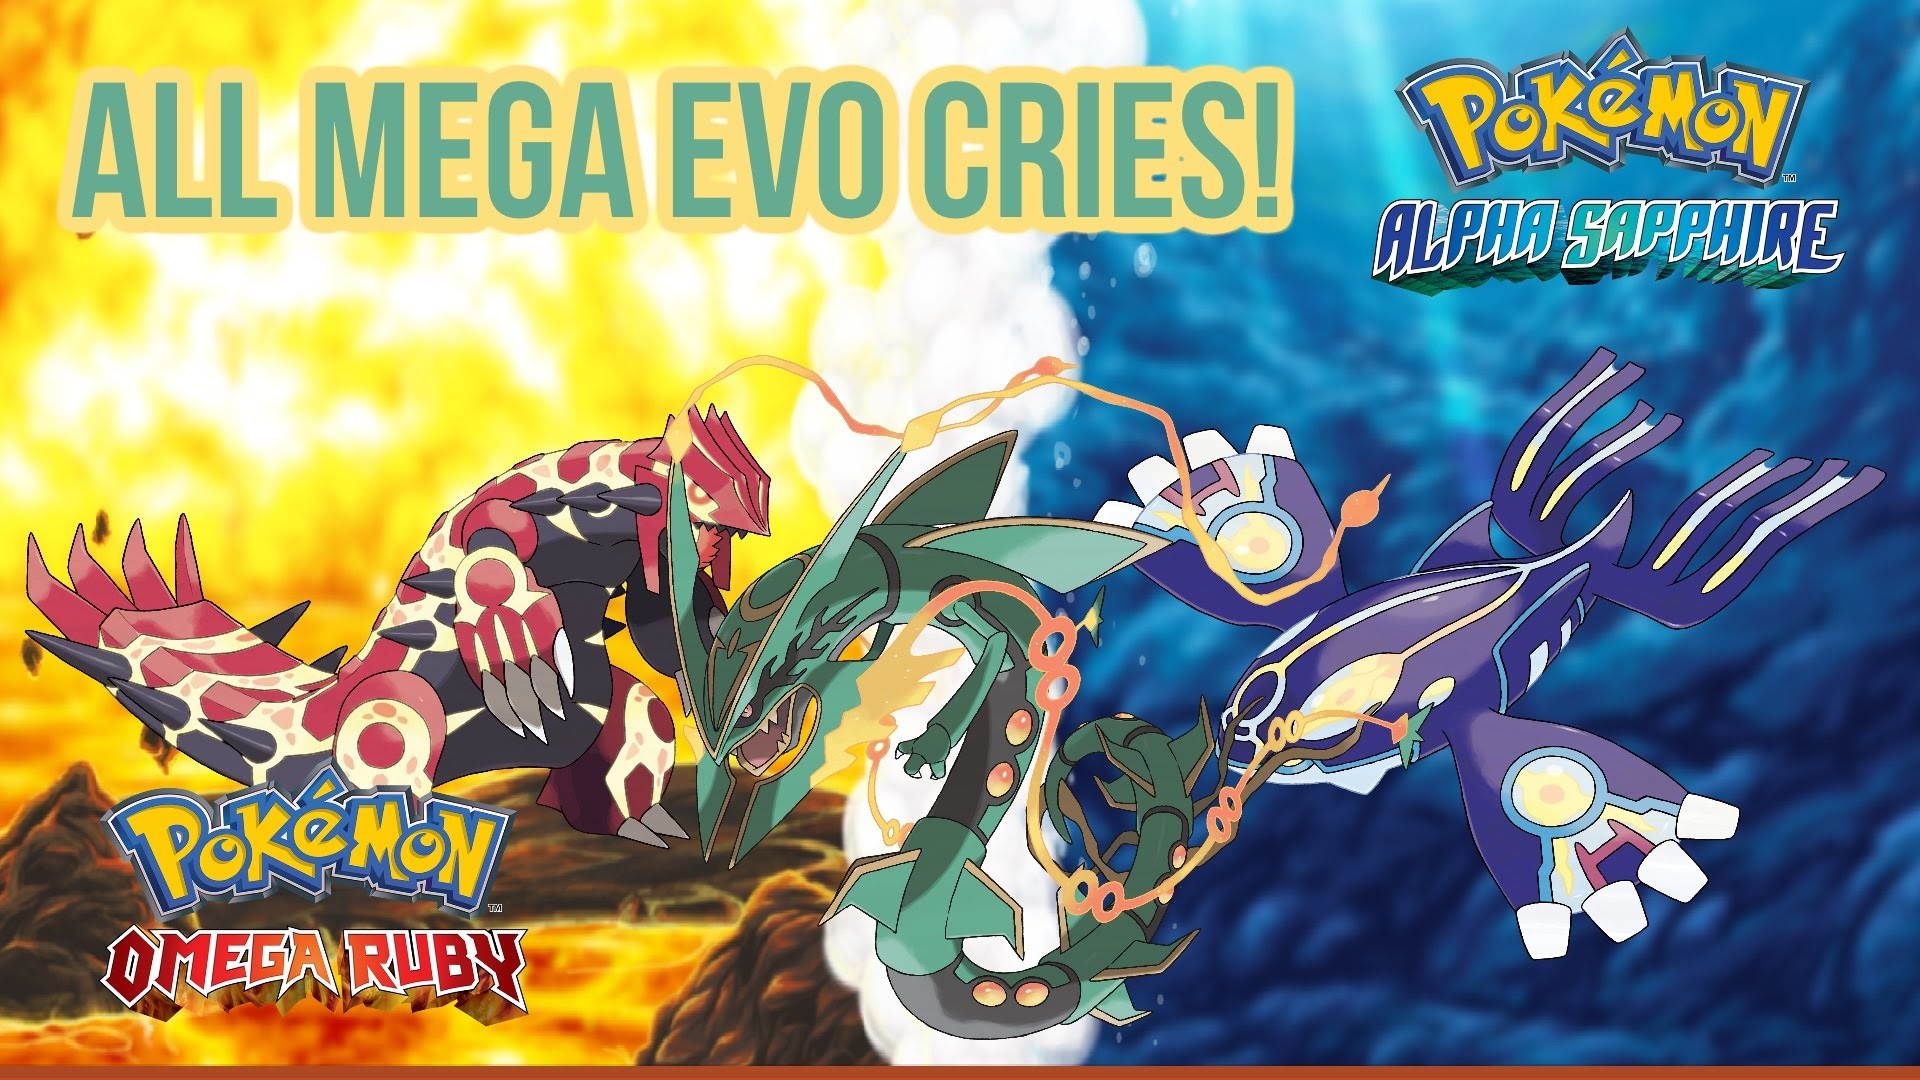 All Mega Evolution Cries from PokÃ©mon X/Y/OR/AS (including Primal Kyogre/ Groudon!) – YouTube